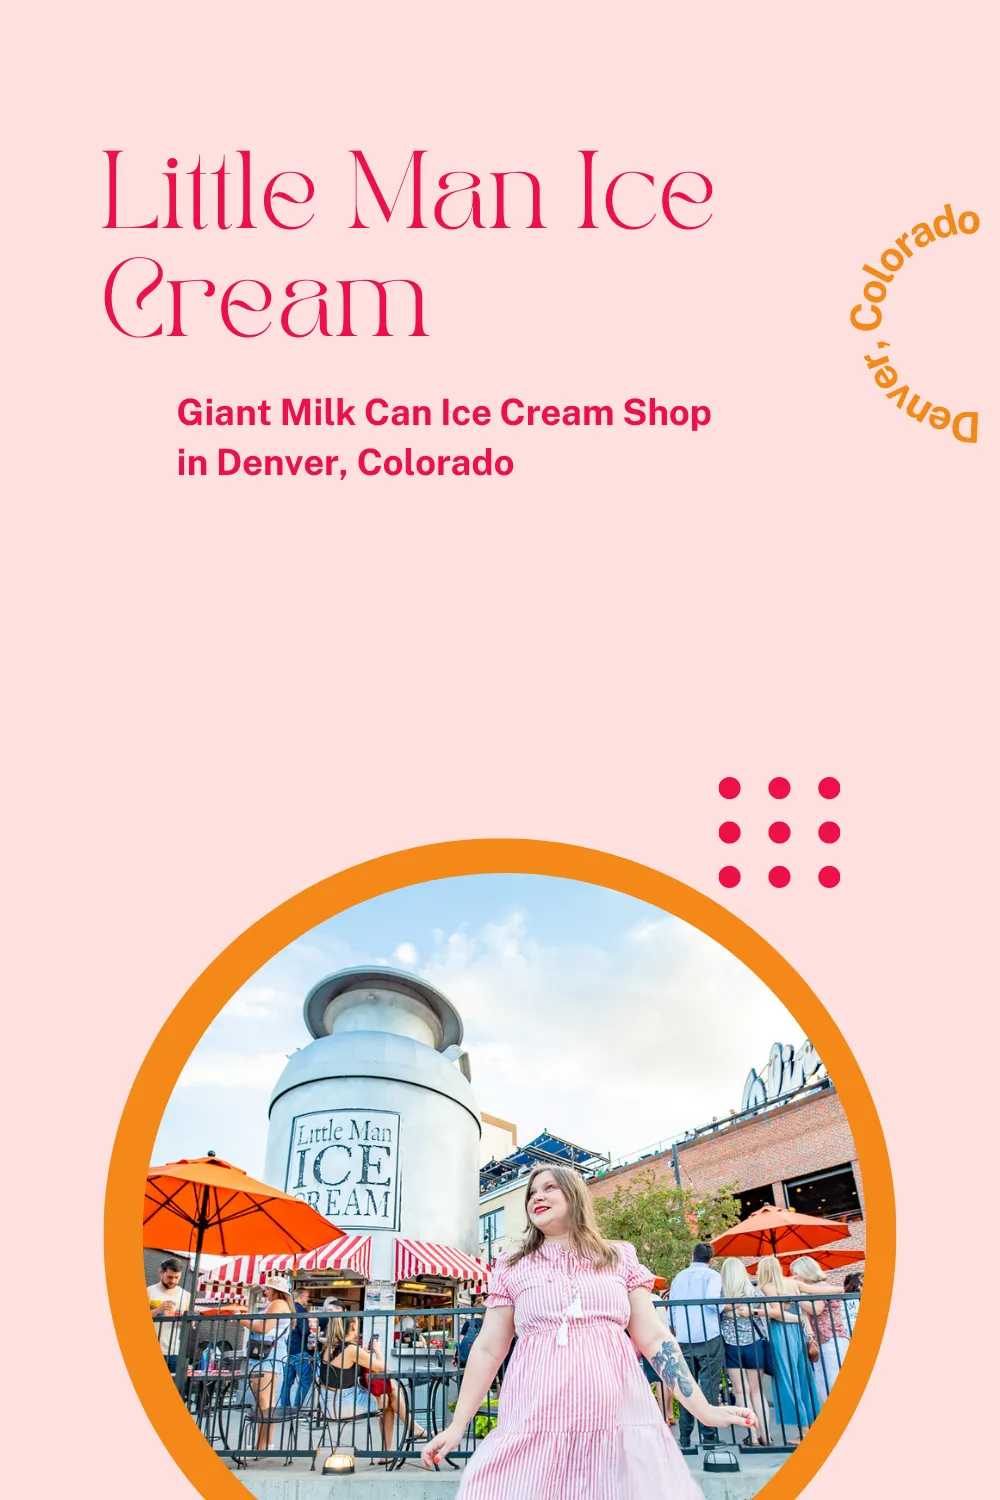 Get the scoop on this Colorado roadside attraction. Little Man Ice Cream in Denver, Colorado serves delicious treats inside of a giant milk can shaped building. It's a sweet stop you can't miss! Located in the Lower Highland neighborhood of Denver (LoHi), the retro ice cream stand is 28-feet tall, 14,000 pounds, and modeled after a 1928-vintage style cream can. #RoadTrip #RoadsideAttraction #RoadsideAttractions #RoadTrips #Denver #Colorado #DenverColorado #IceCream